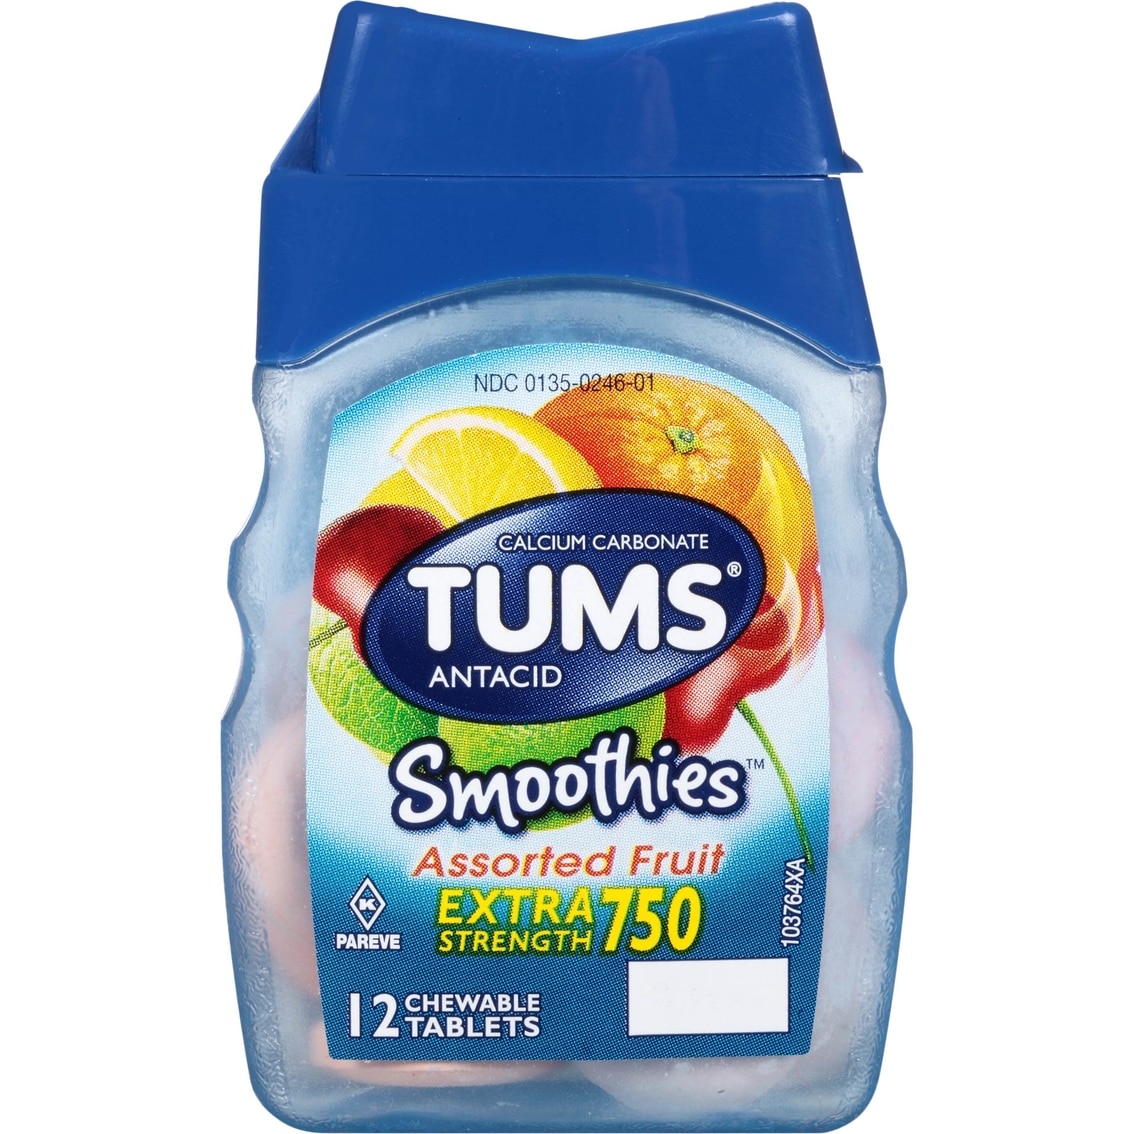 Tums Smoothies Assorted Fruit Chewable Tablets 12 Ct.